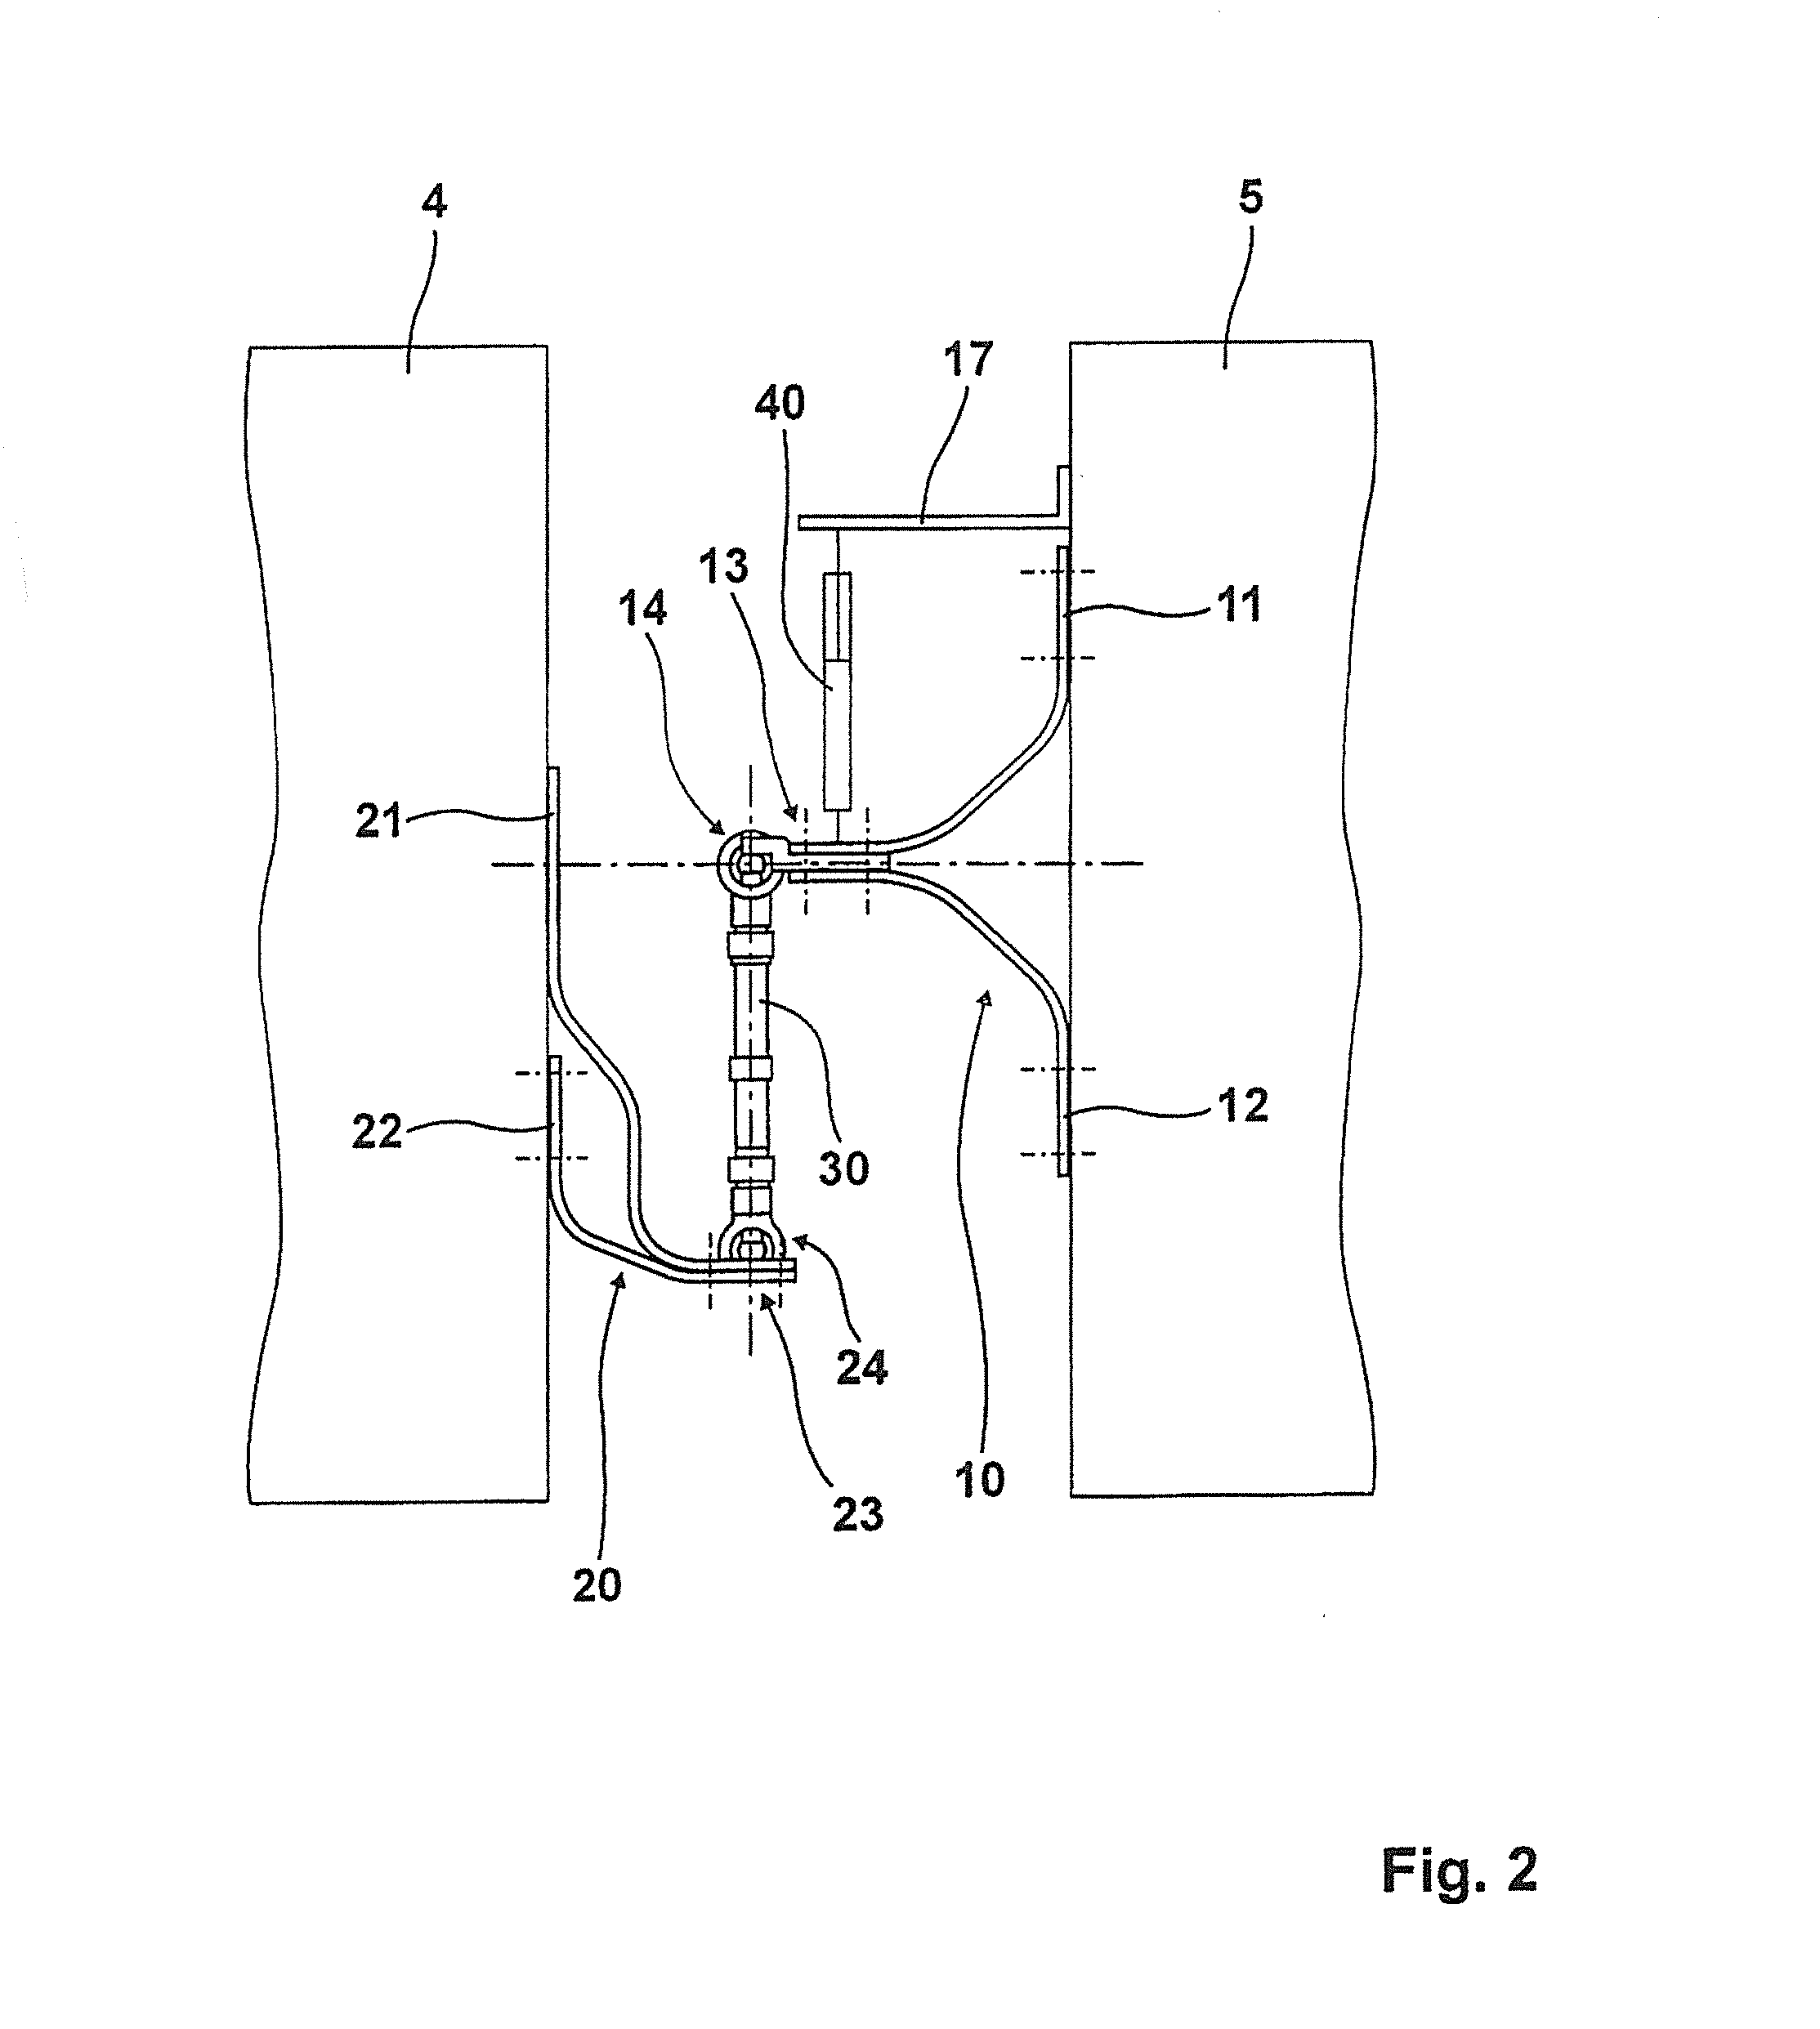 Device disposed in the roof area of two articulated vehicle parts for limiting the pitch movement of the vehicle parts relative to each other